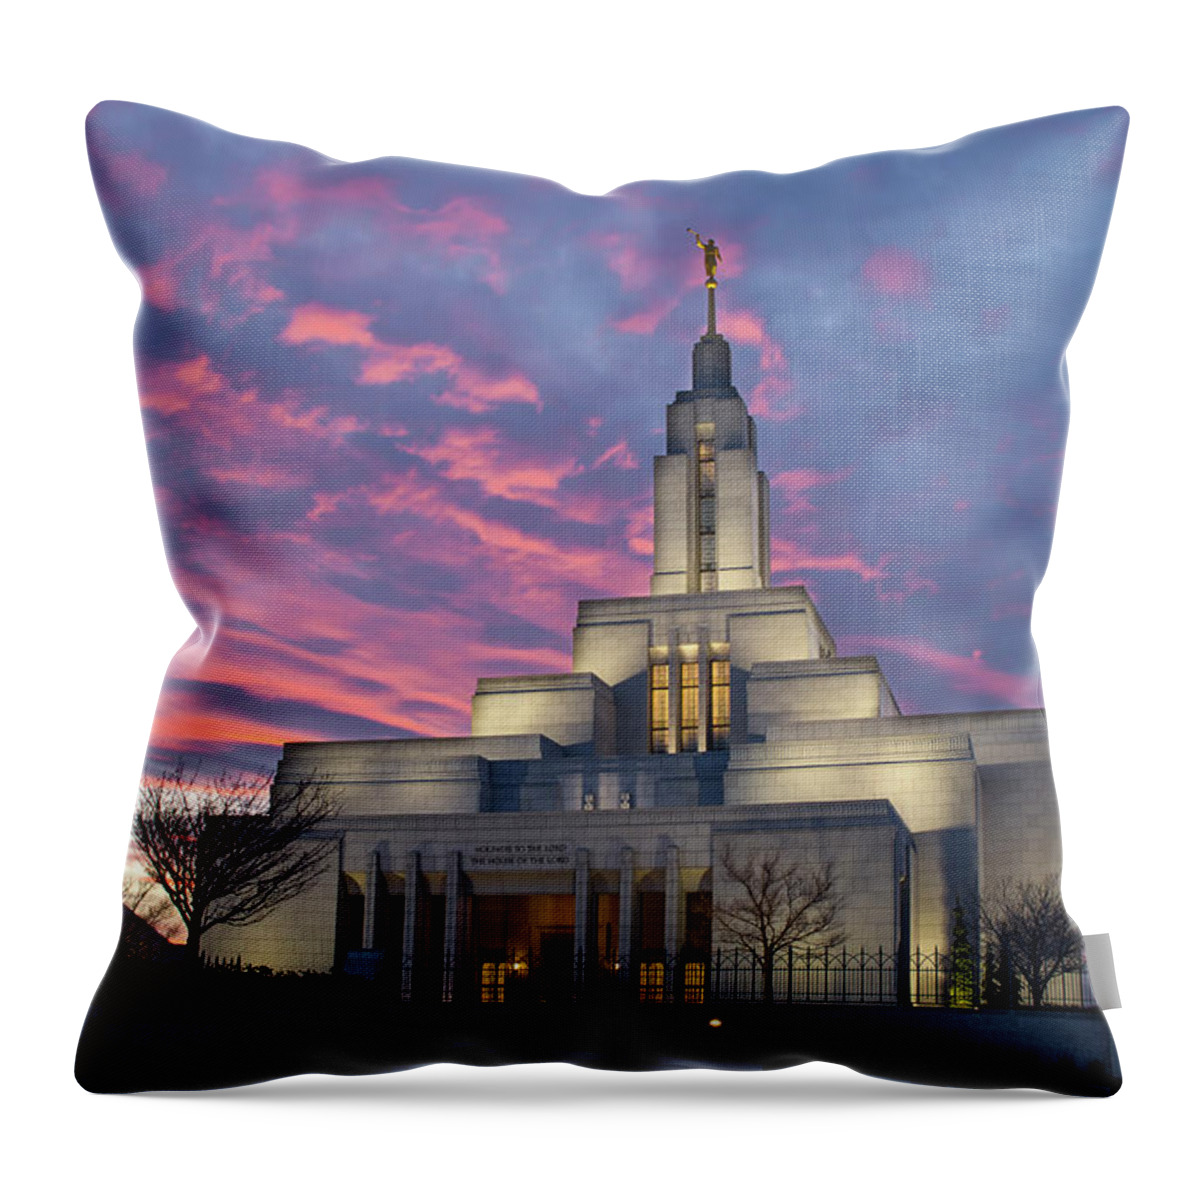 Trees Throw Pillow featuring the photograph Draper Temple at Sunset by K Bradley Washburn